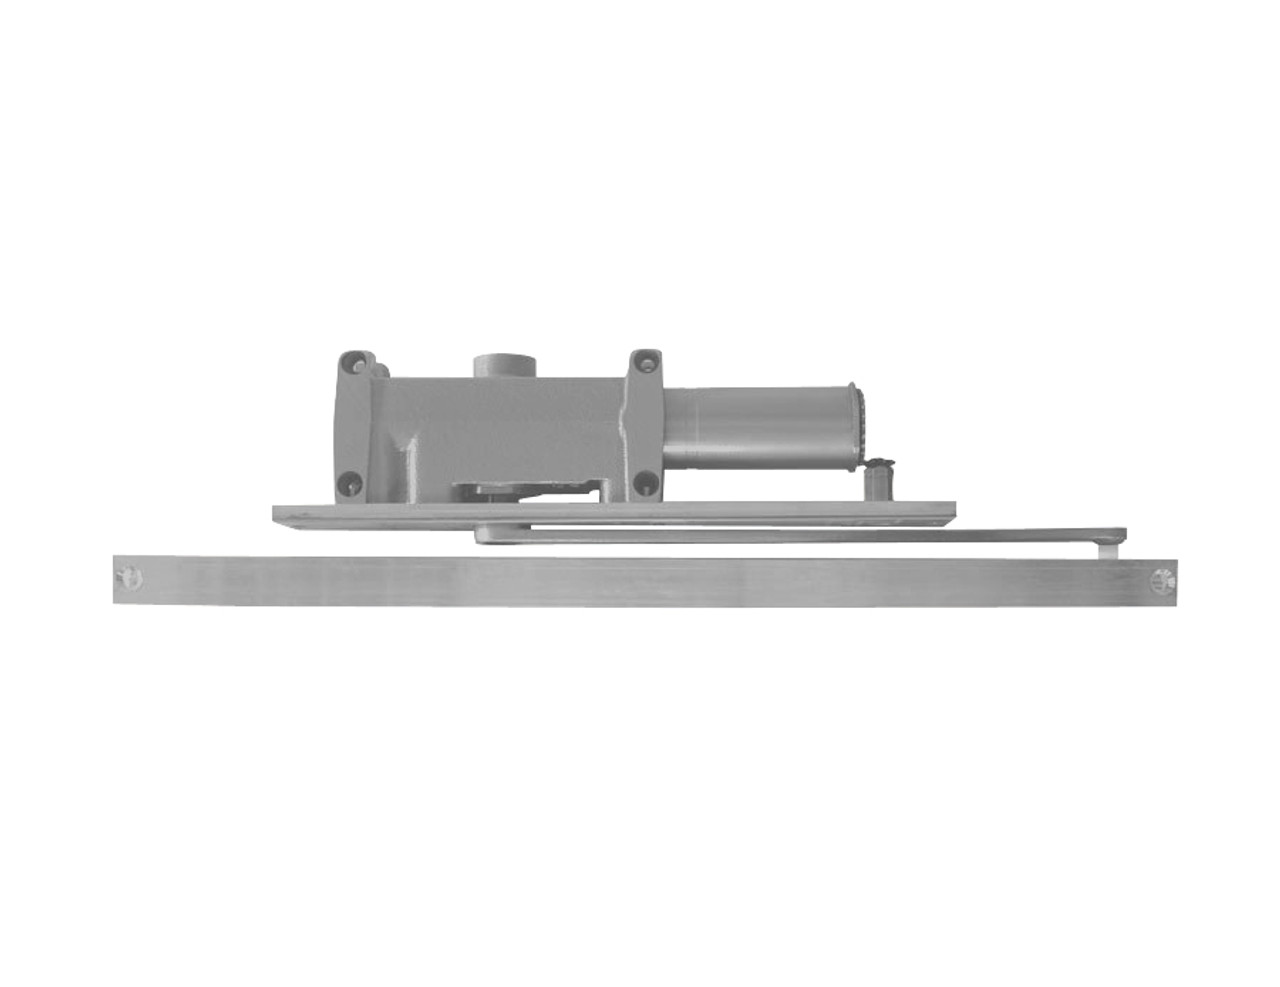 5011-H-LH-US15 LCN Door Closer with Hold Open Arm in Satin Nickel Finish